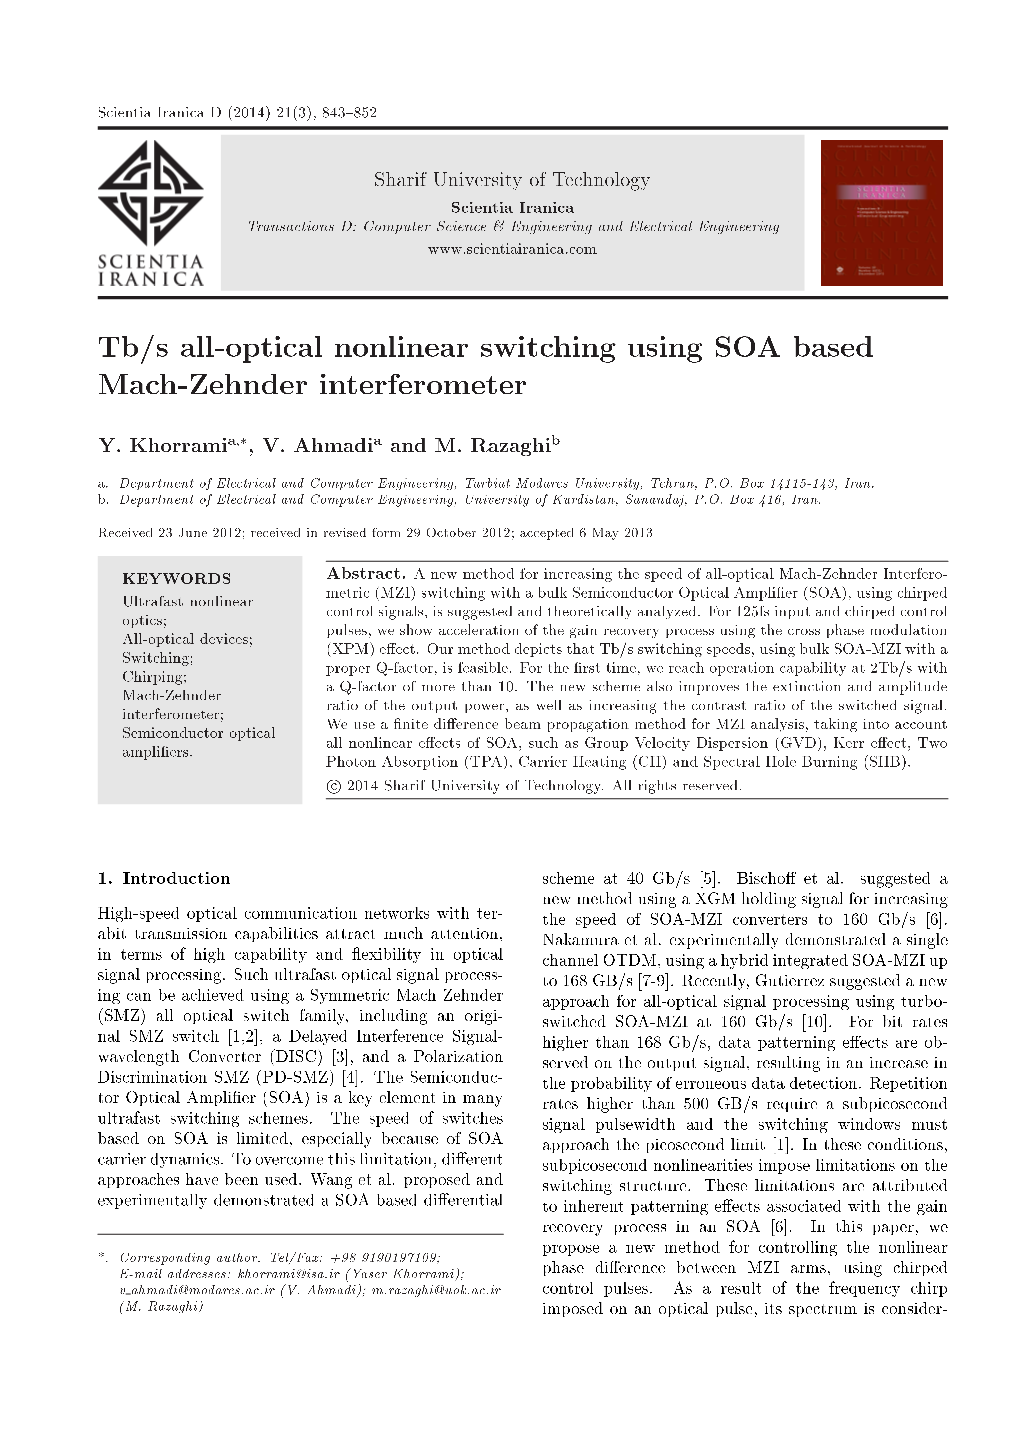 Tb/S All-Optical Nonlinear Switching Using SOA Based Mach-Zehnder Interferometer